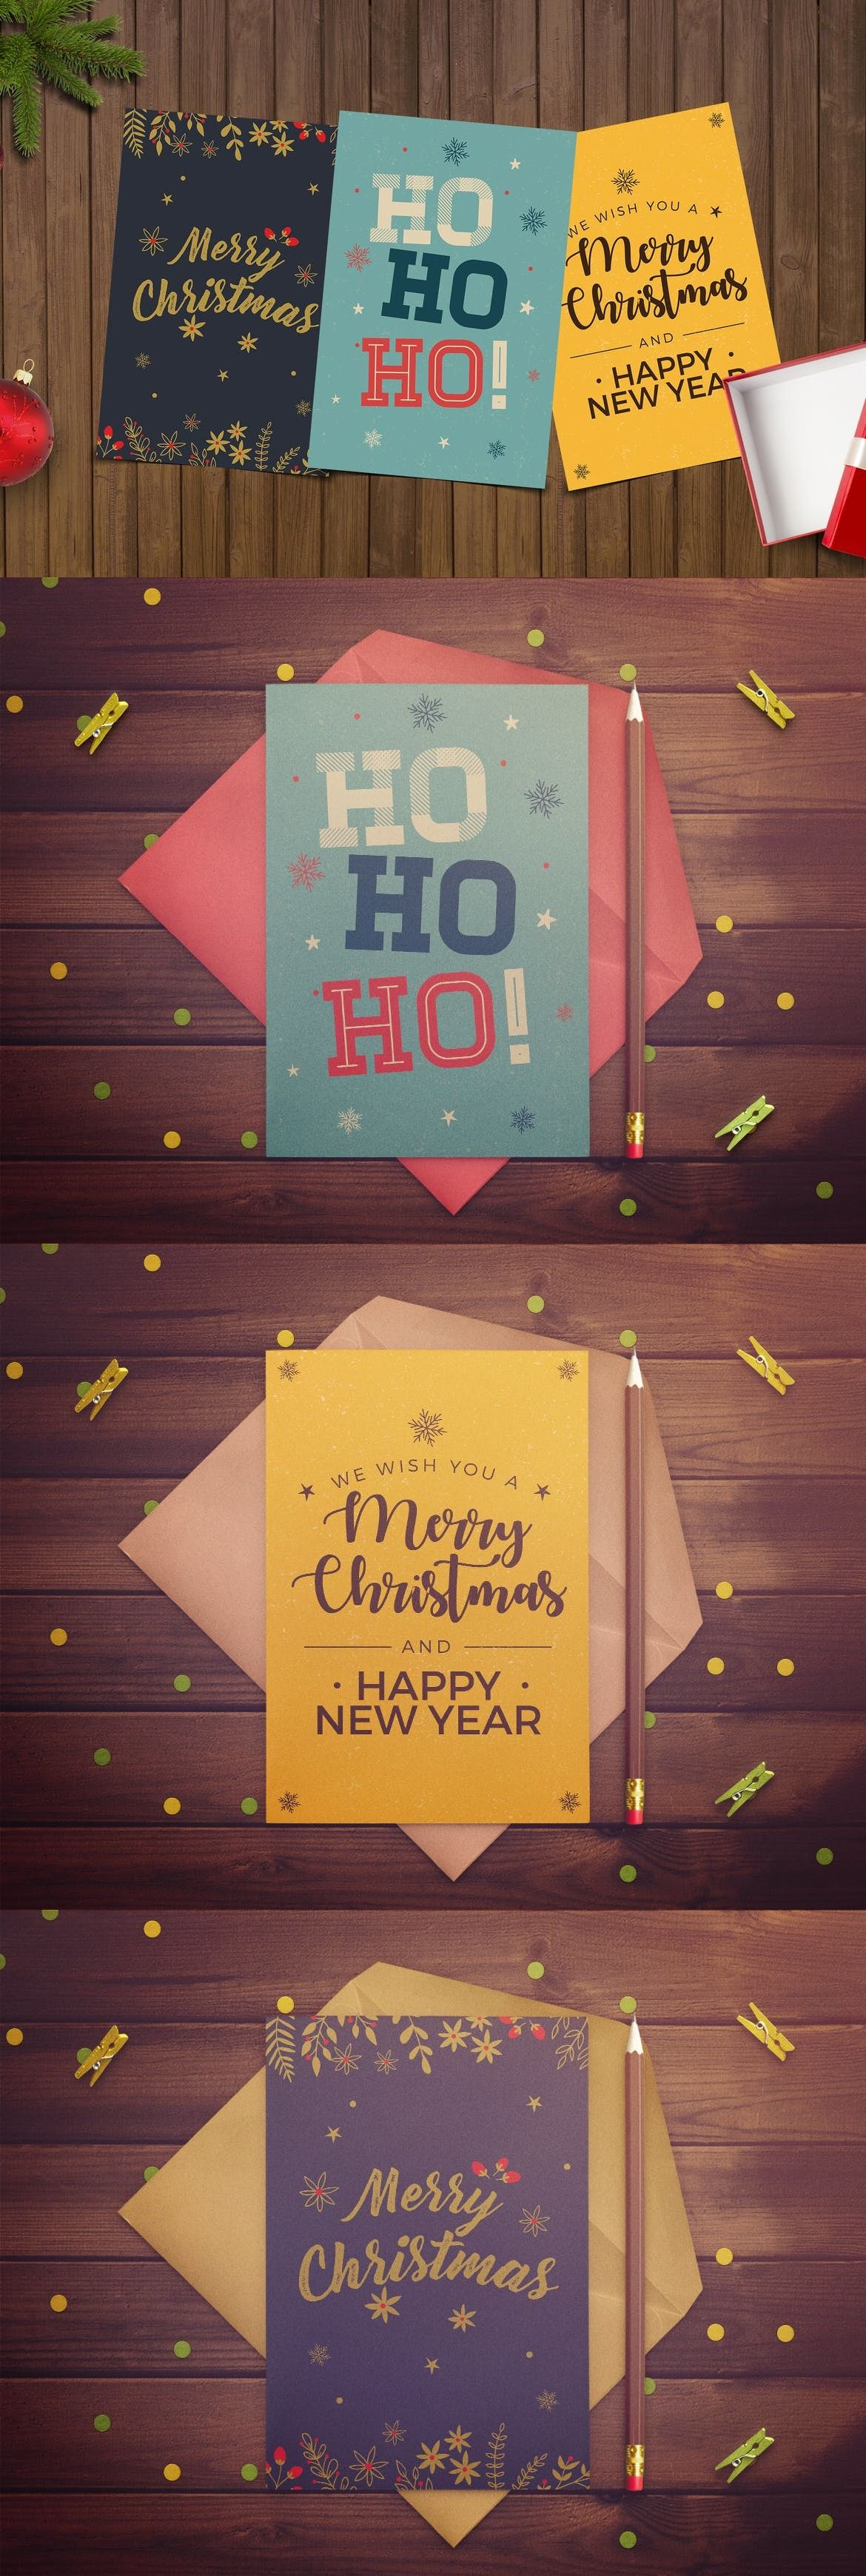 Simple Christmas Card Template — Adobe Photoshop, Adobe Throughout Adobe Illustrator Christmas Card Template